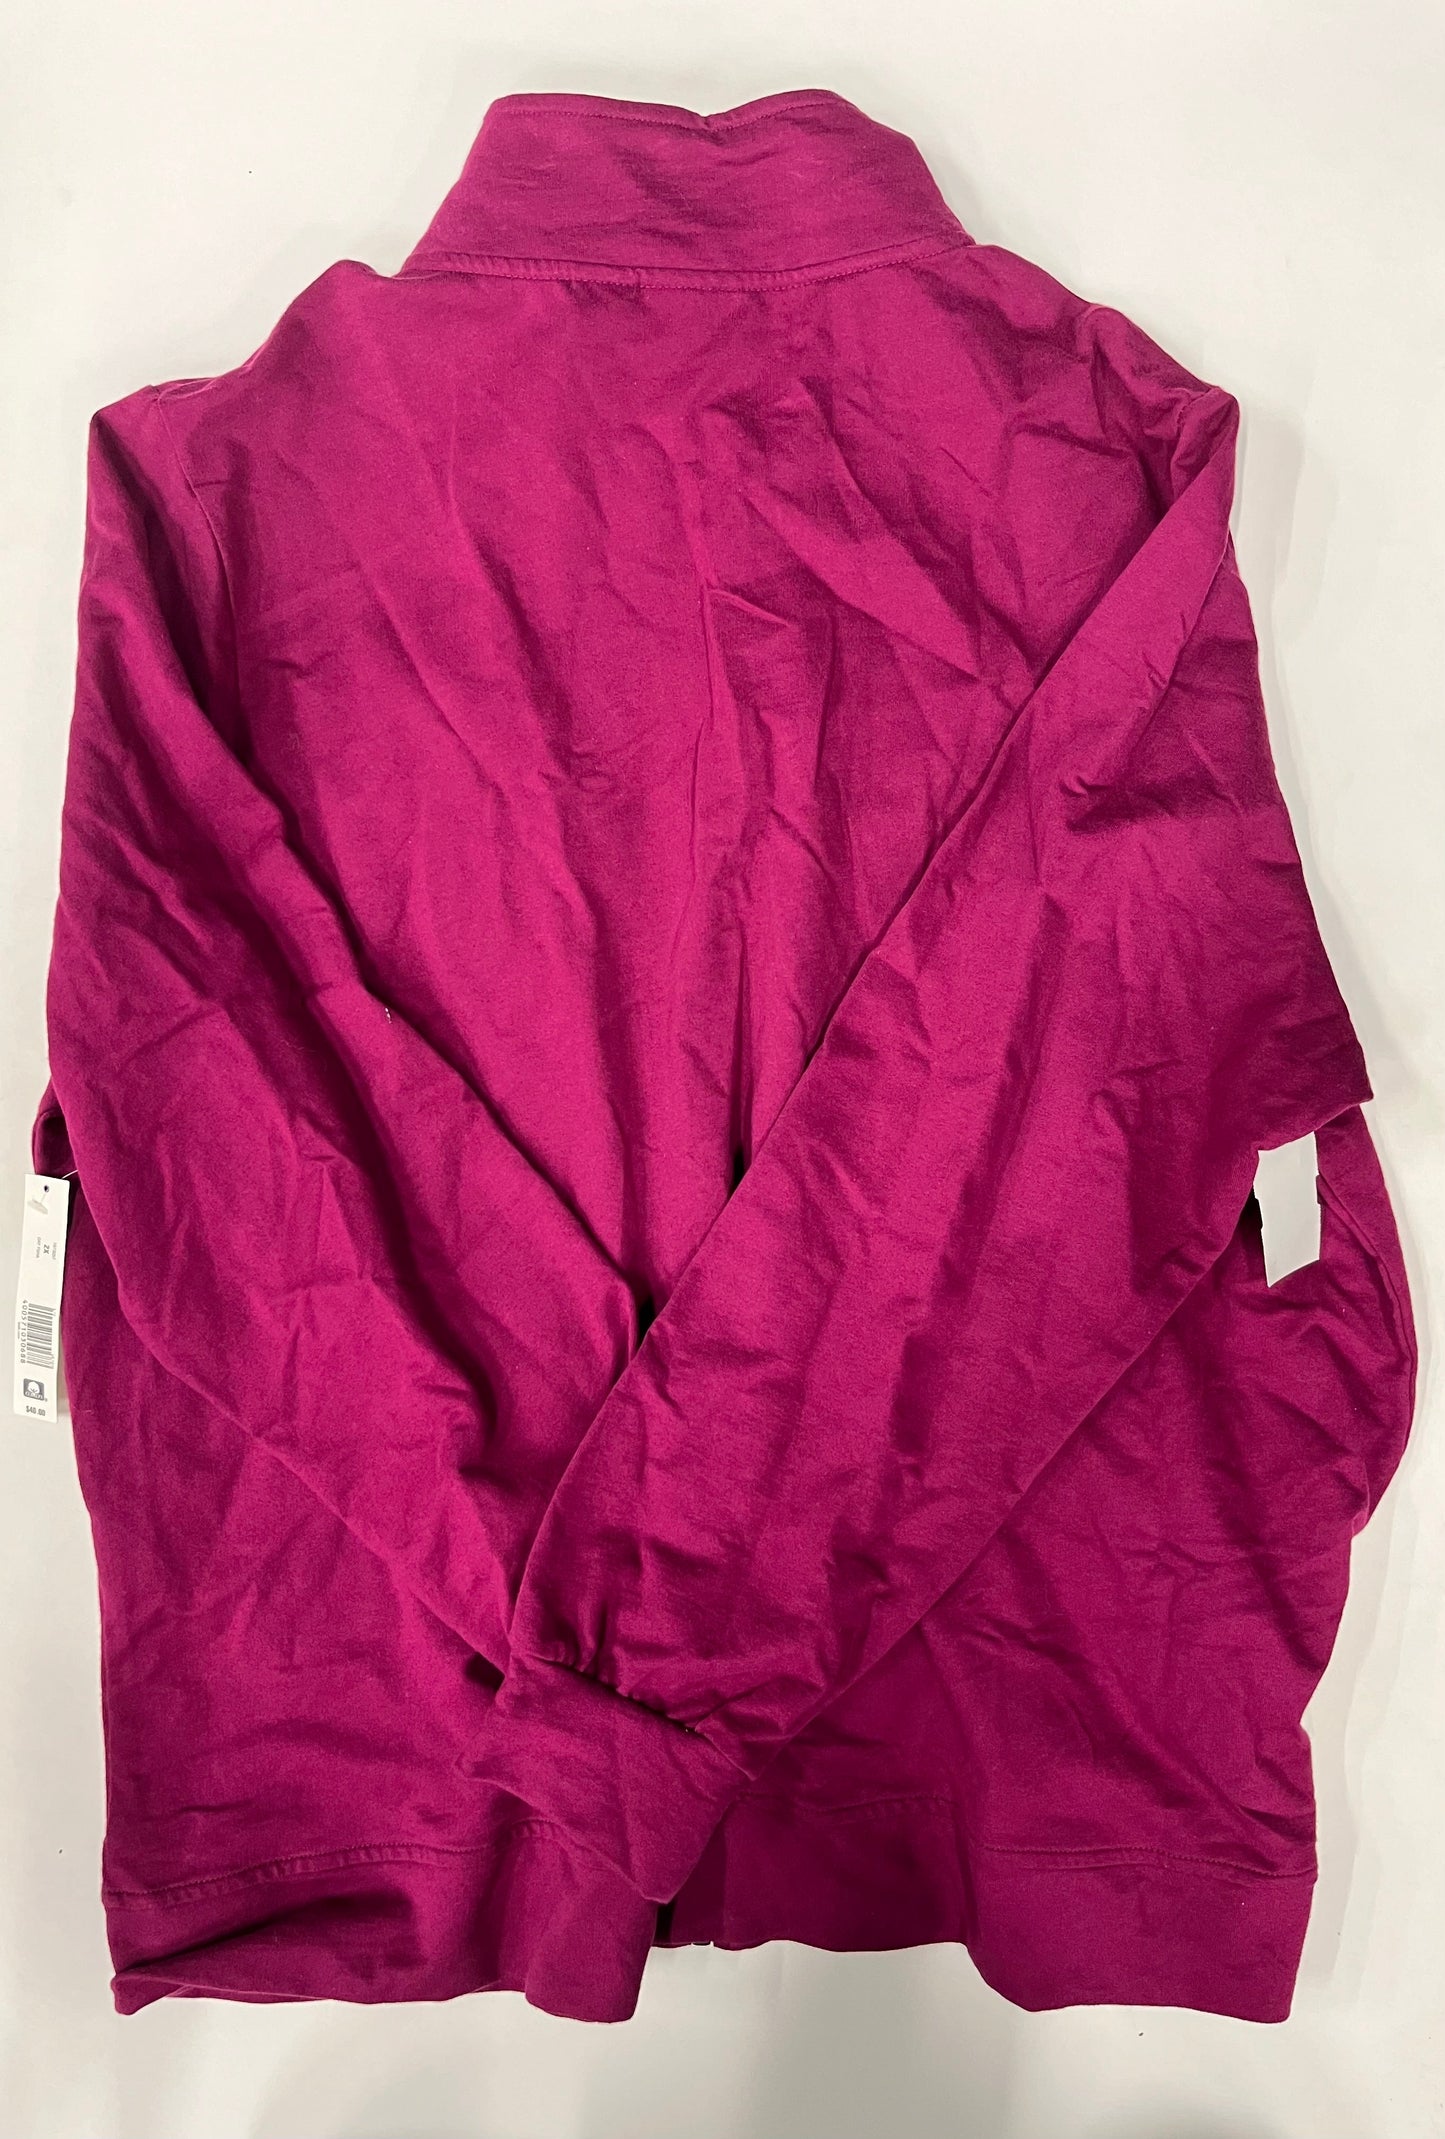 Athletic Jacket By Kim Rogers NWT  Size: 2x